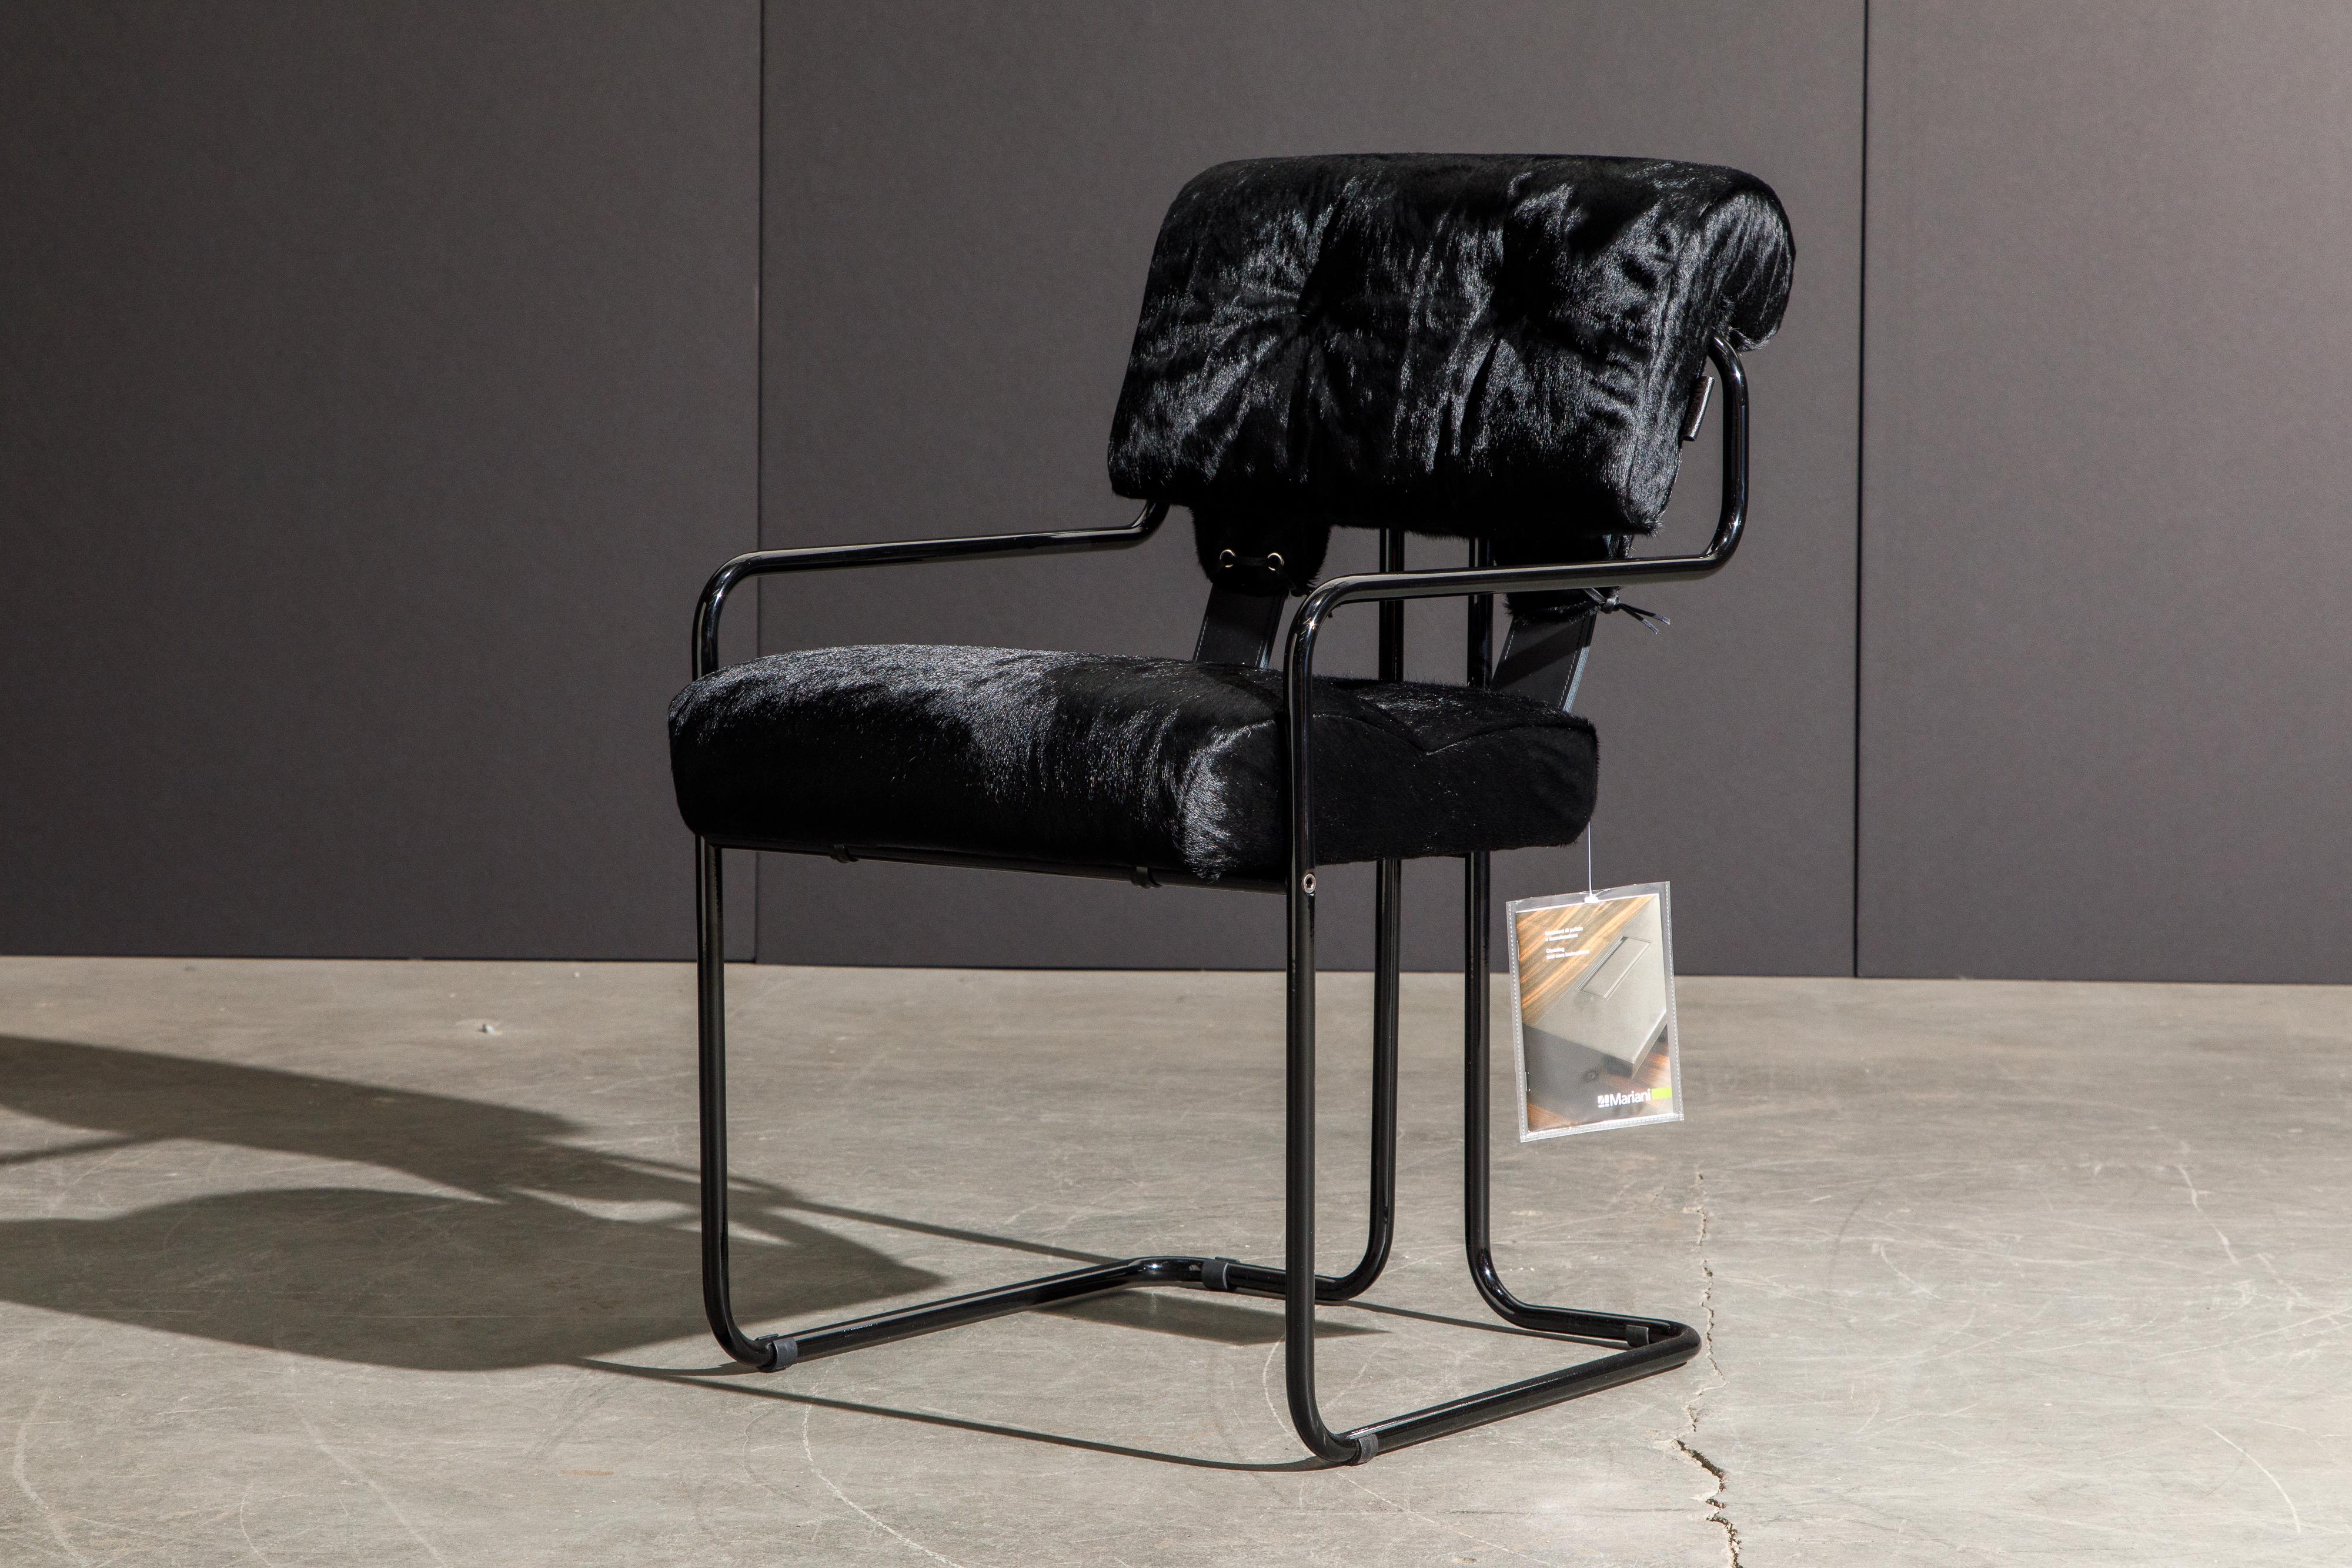 Currently, the most coveted dining chairs by interior designers are 'Tucroma' chairs by Guido Faleschini for i4 Mariani, and we have this incredible pair (2) of Tucroma armchairs in beautiful black cowhide leather with black lacquered frames. The